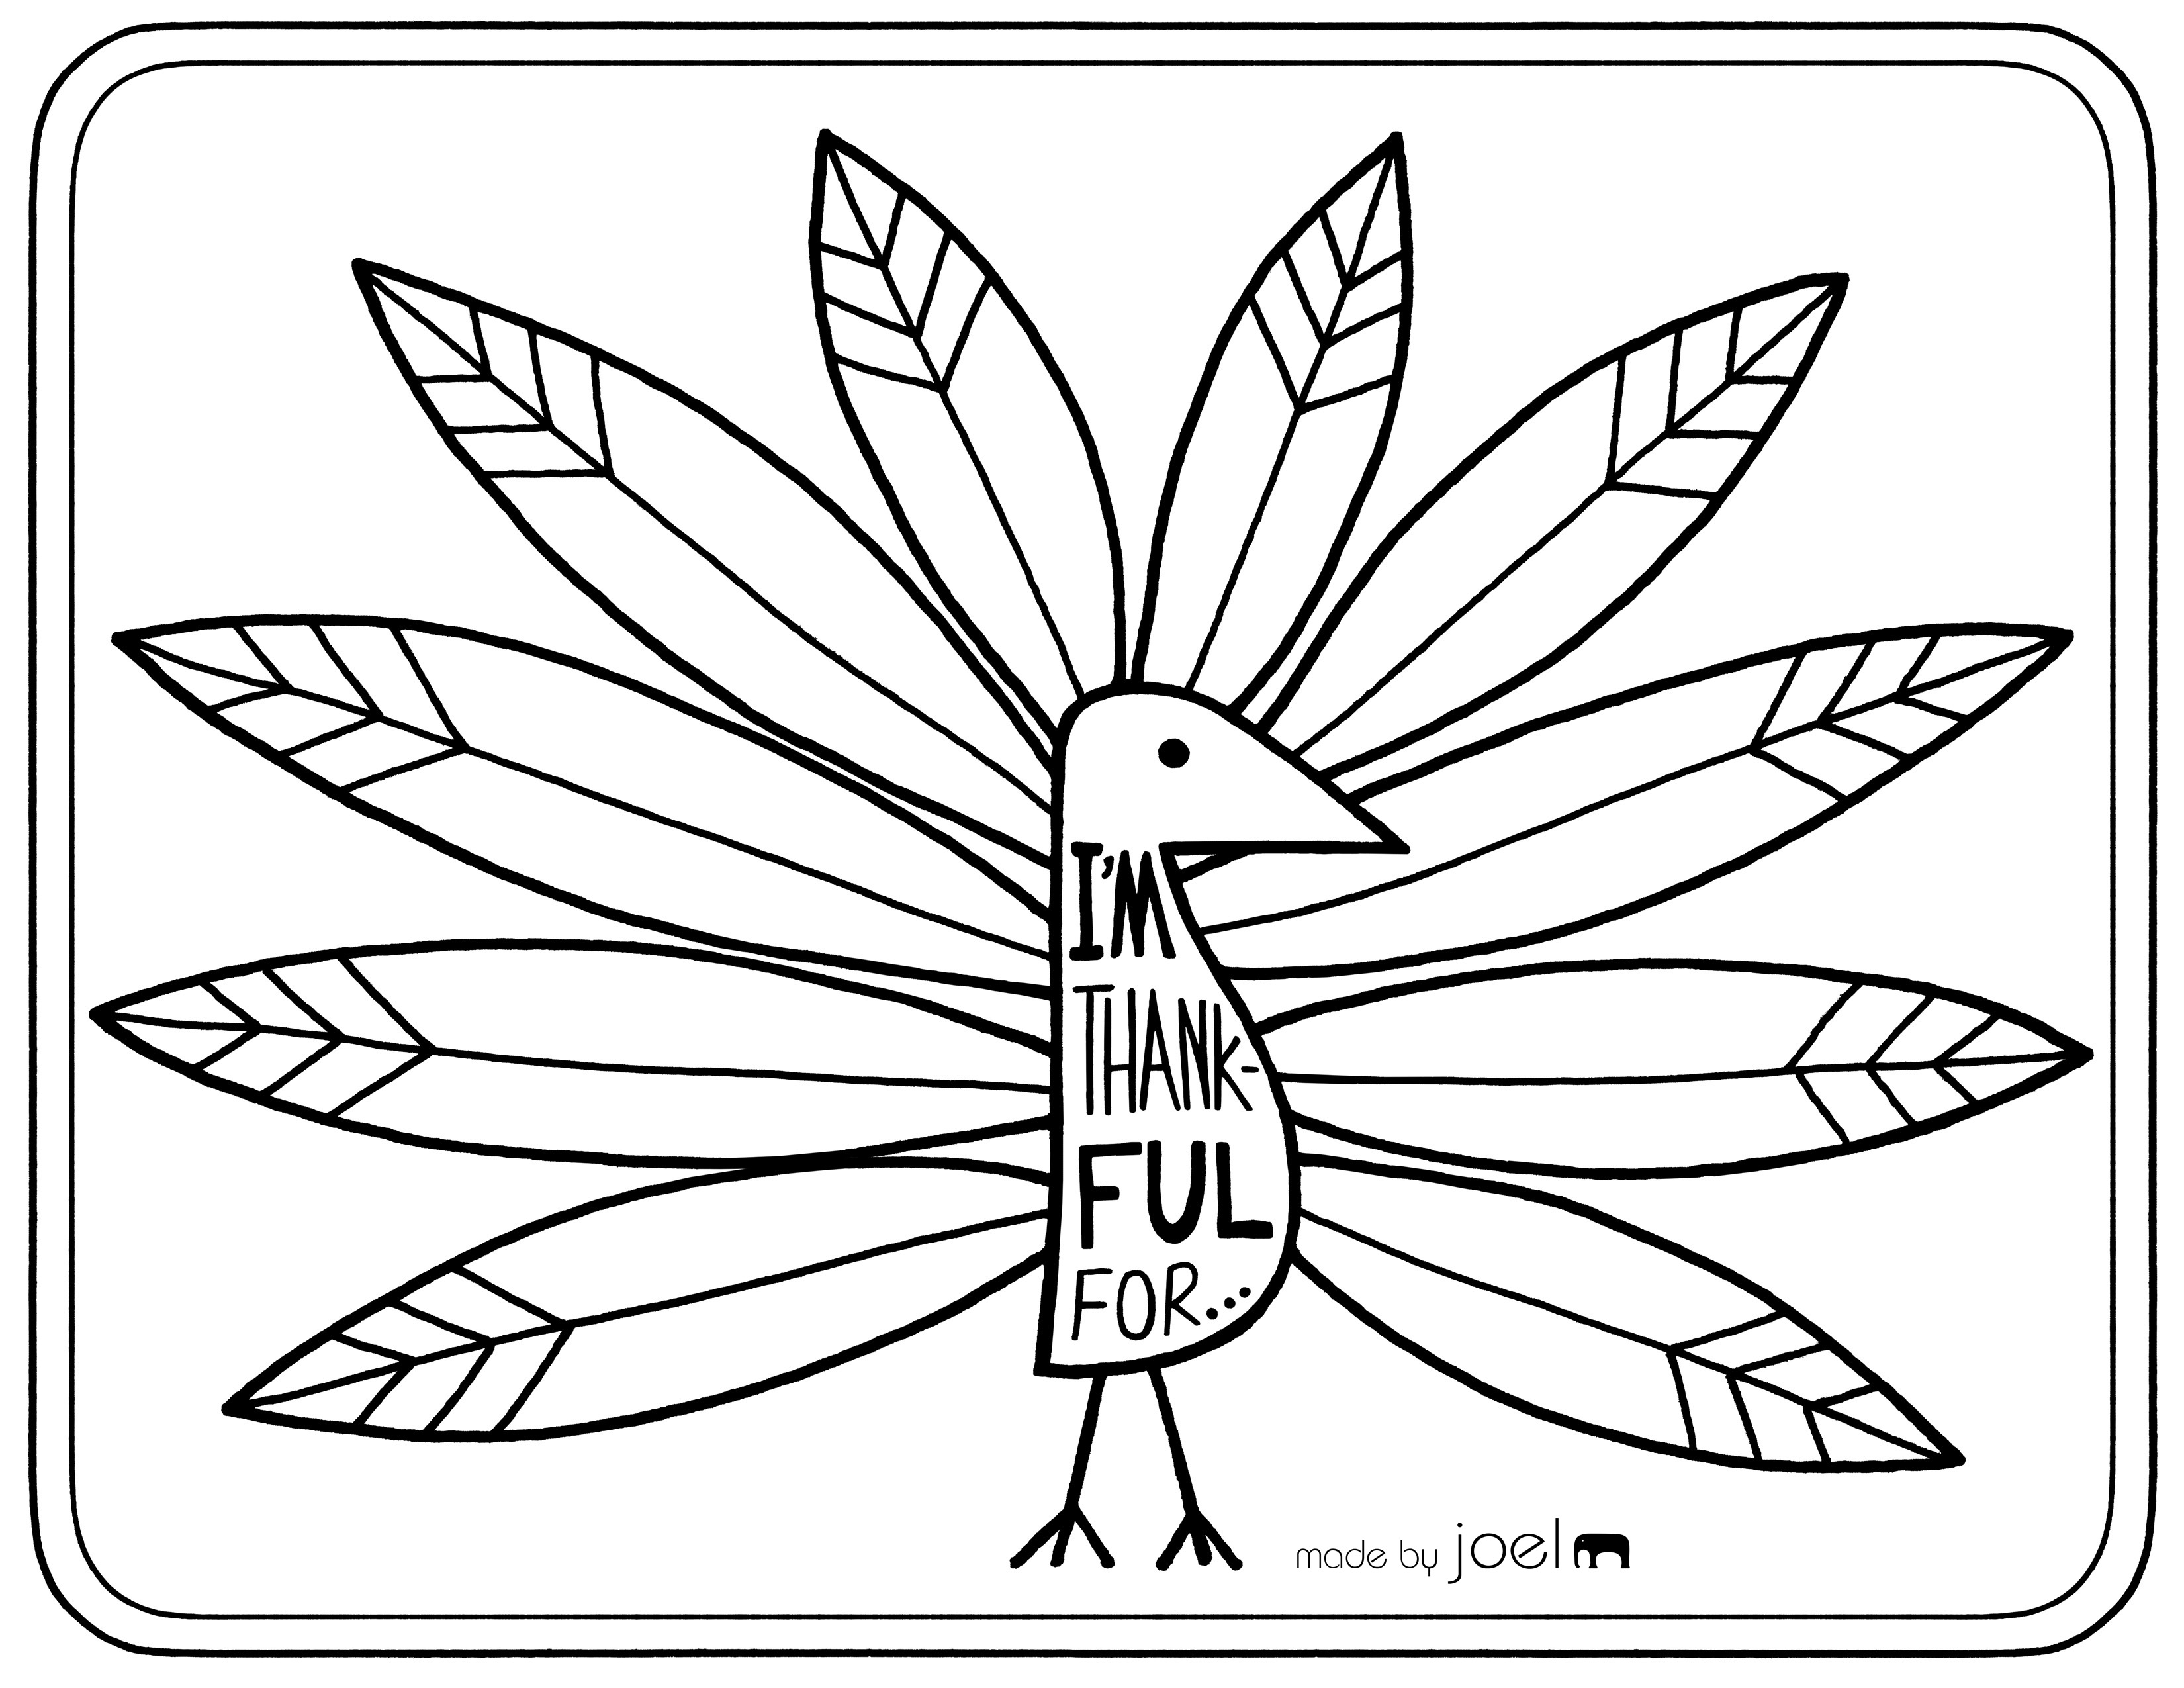 http://madebyjoel.com/wp-content/uploads/2014/11/Made-by-Joel-Thanksgiving-Turkey-Thankful-For-Coloring-Sheet.jpg